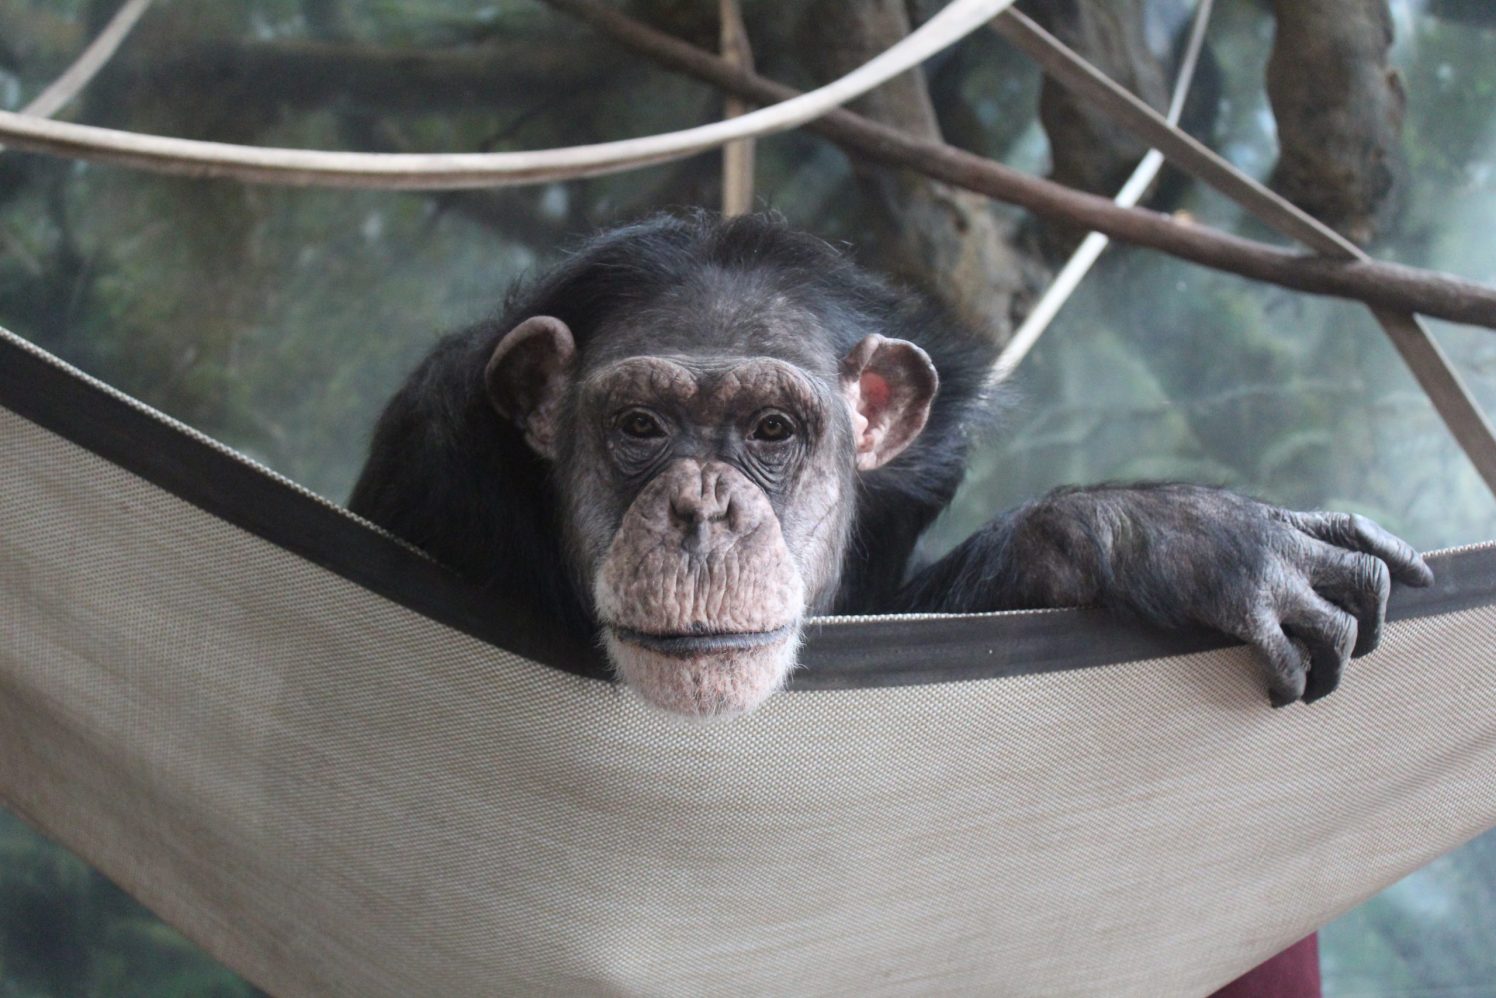 Lincoln Park Zoo Responds to CVS' Promise to Stop Selling Problematic  Greeting Cards Featuring Chimpanzees - Lincoln Park Zoo